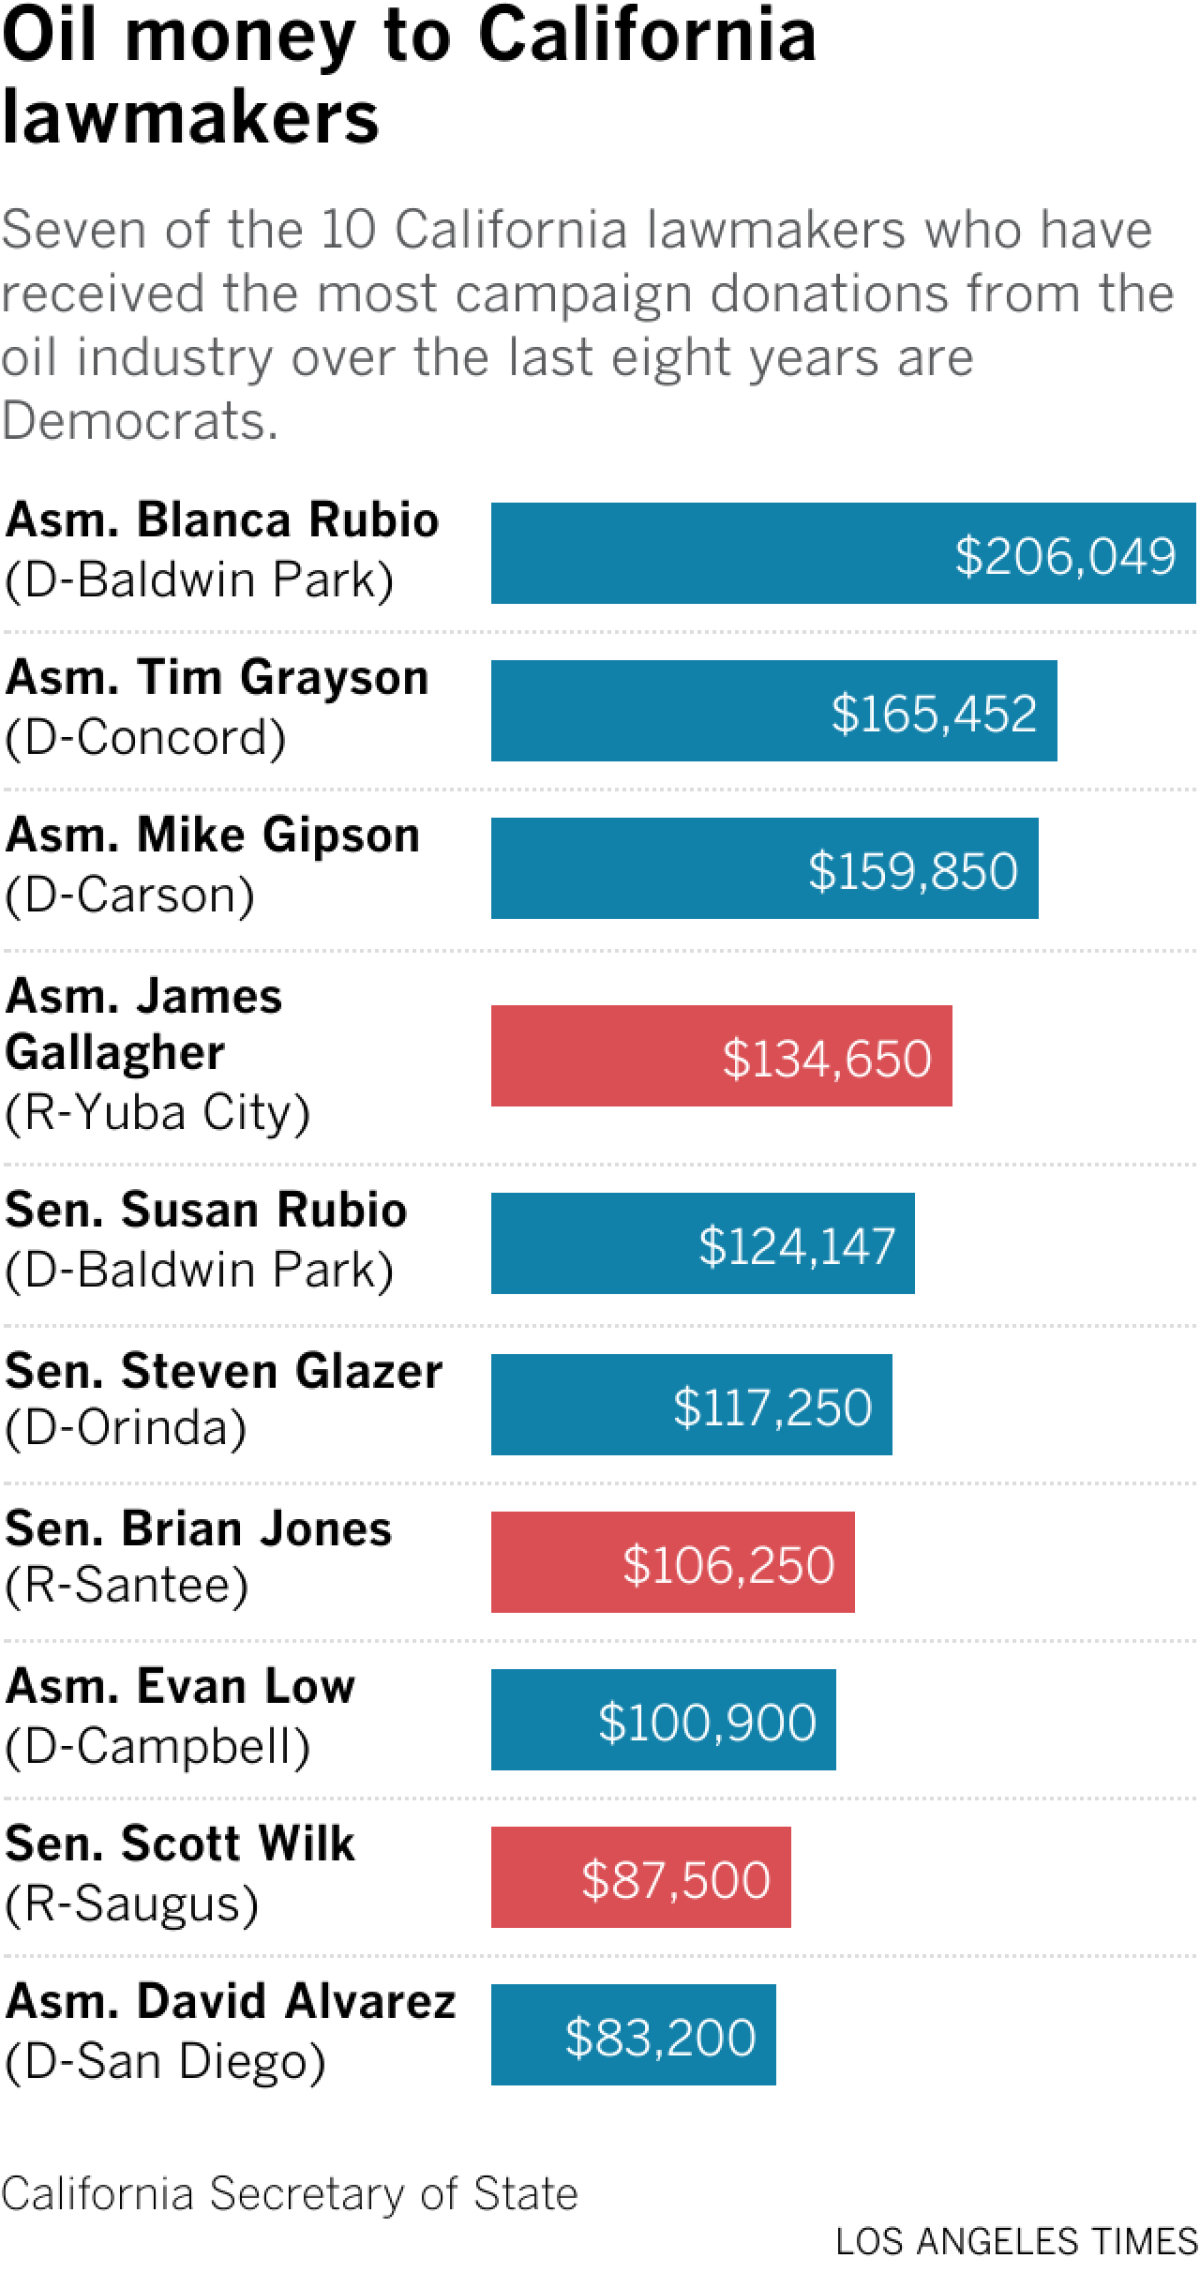 Seven of the 10 California lawmakers who have received the most campaign donations from the oil industry over the last eight years are Democrats.